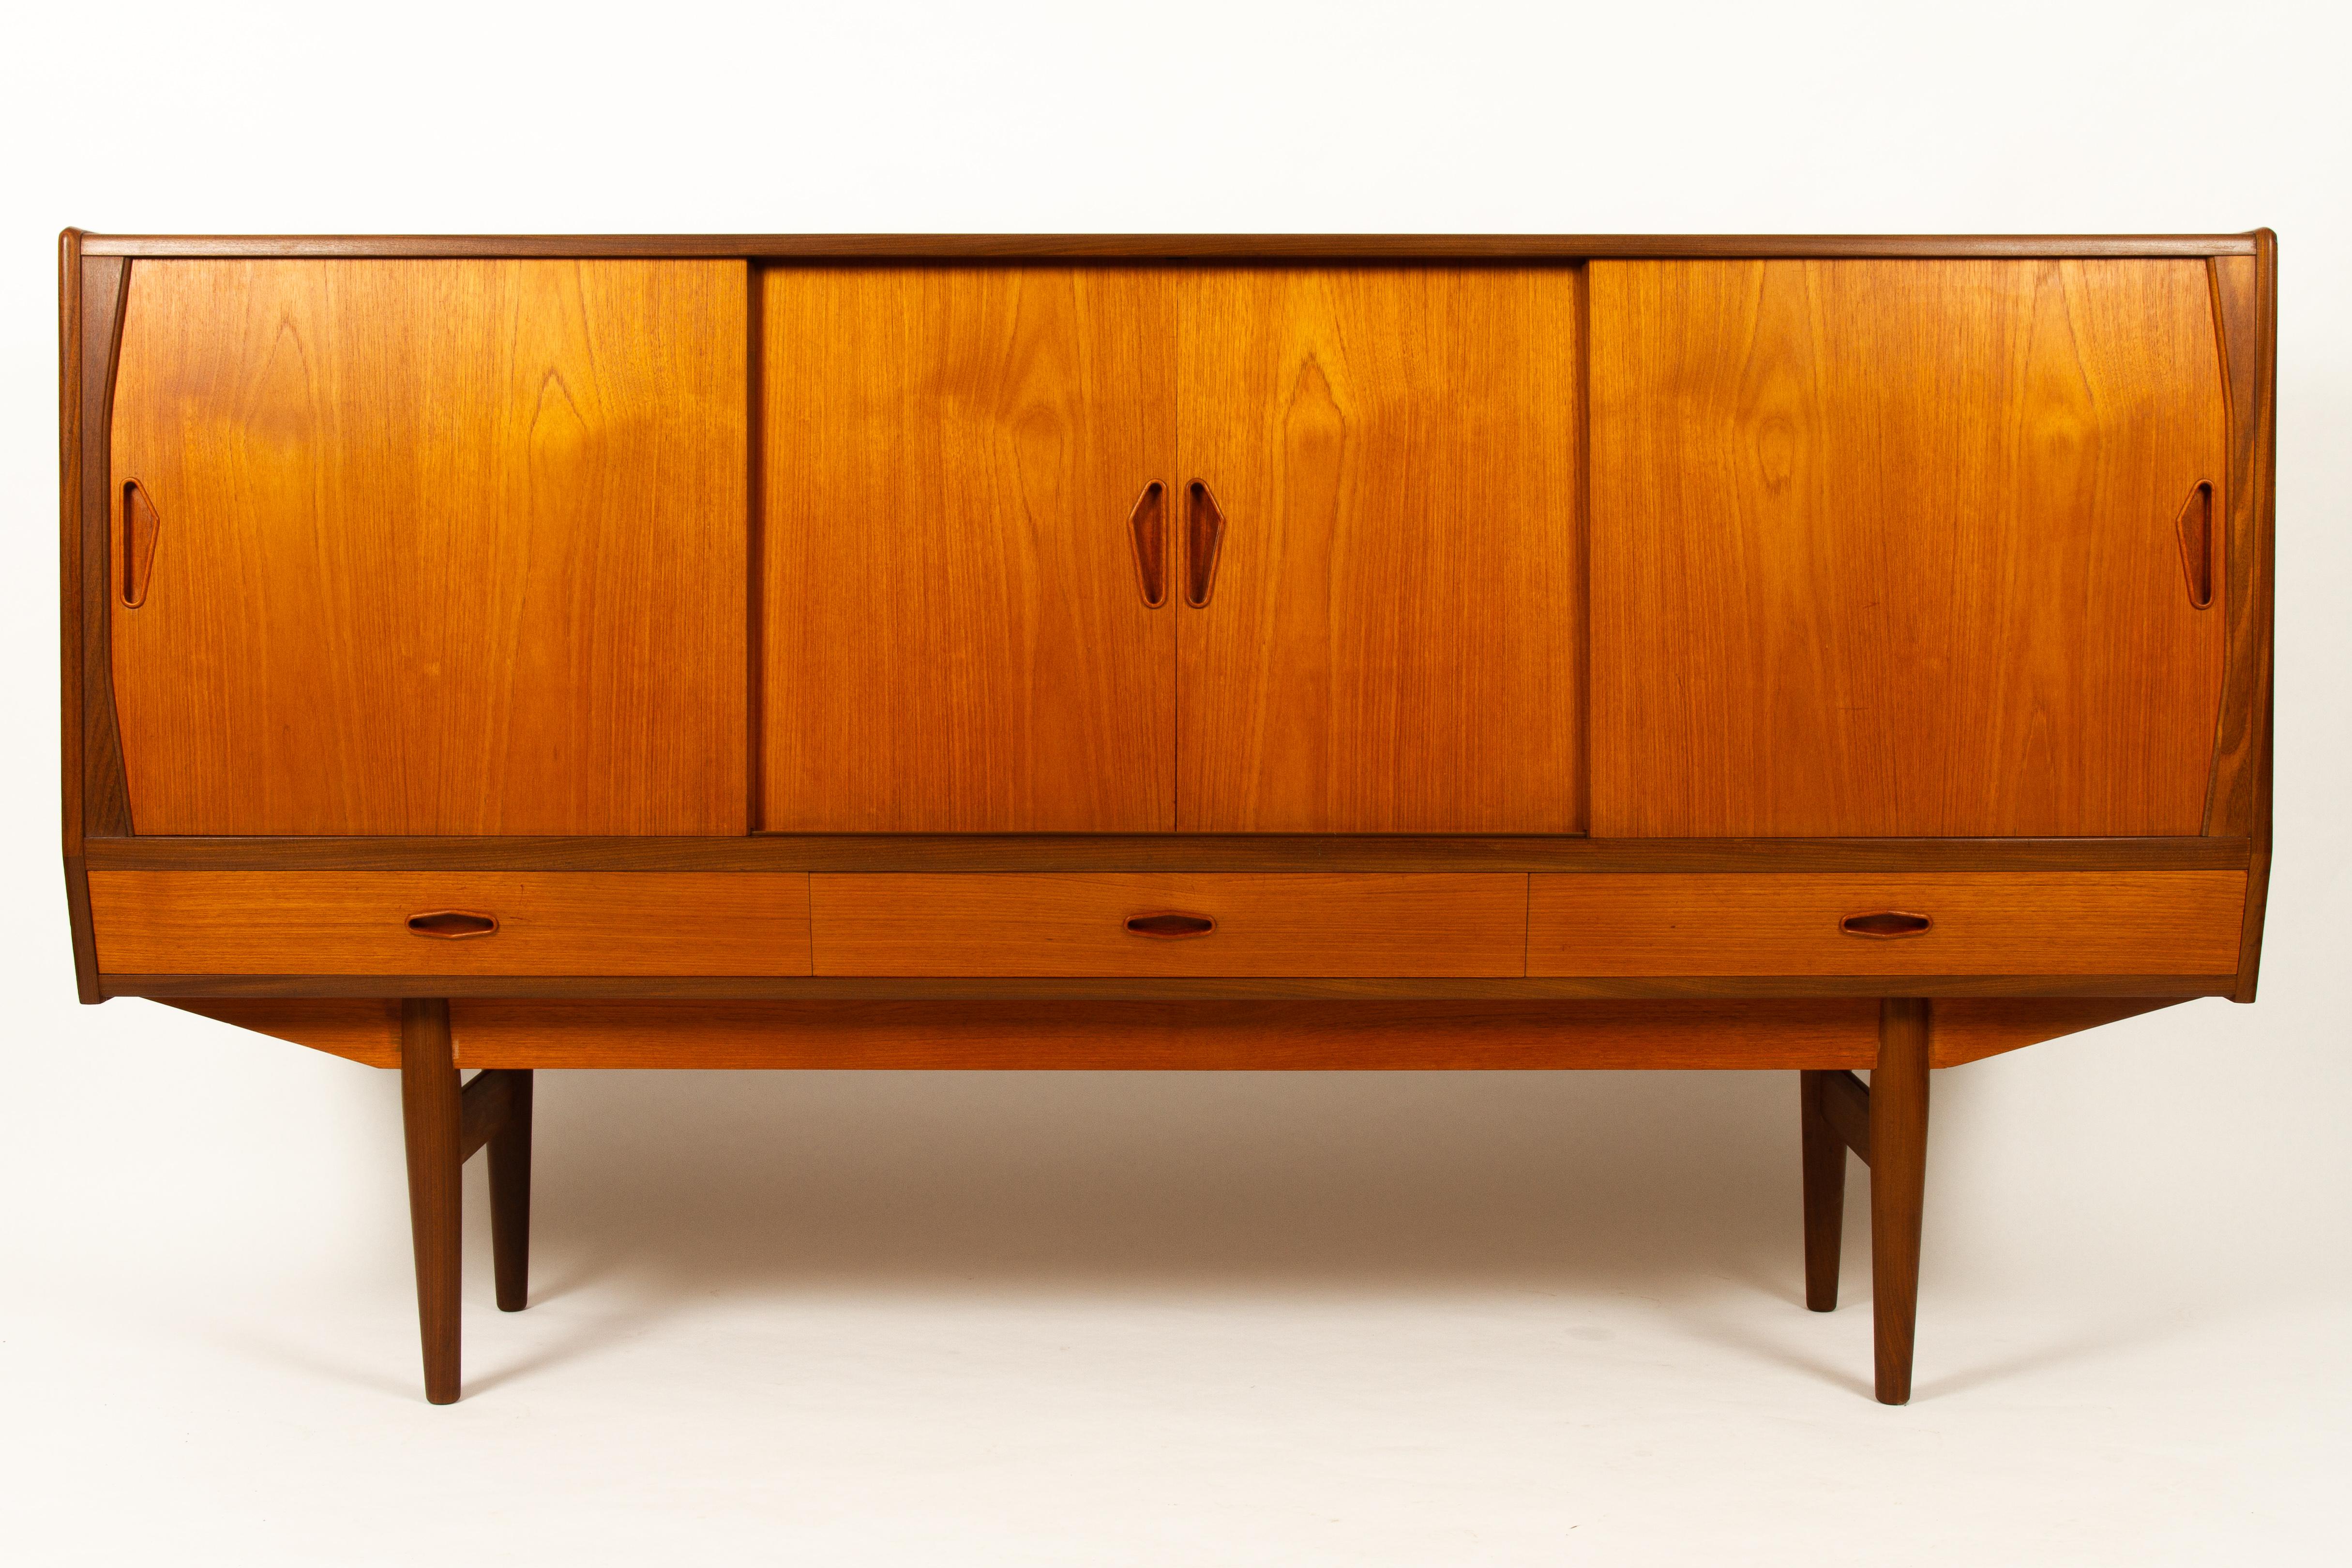 Vintage Danish teak sideboard, 1960s
Mid-Century Modern tall teak credenza made in Denmark in the 1960s. Beautiful veneer with a golden hue and sculpted grips in solid teak. Mirrored bar unit with curved shelf and drawers with brass handles. Two